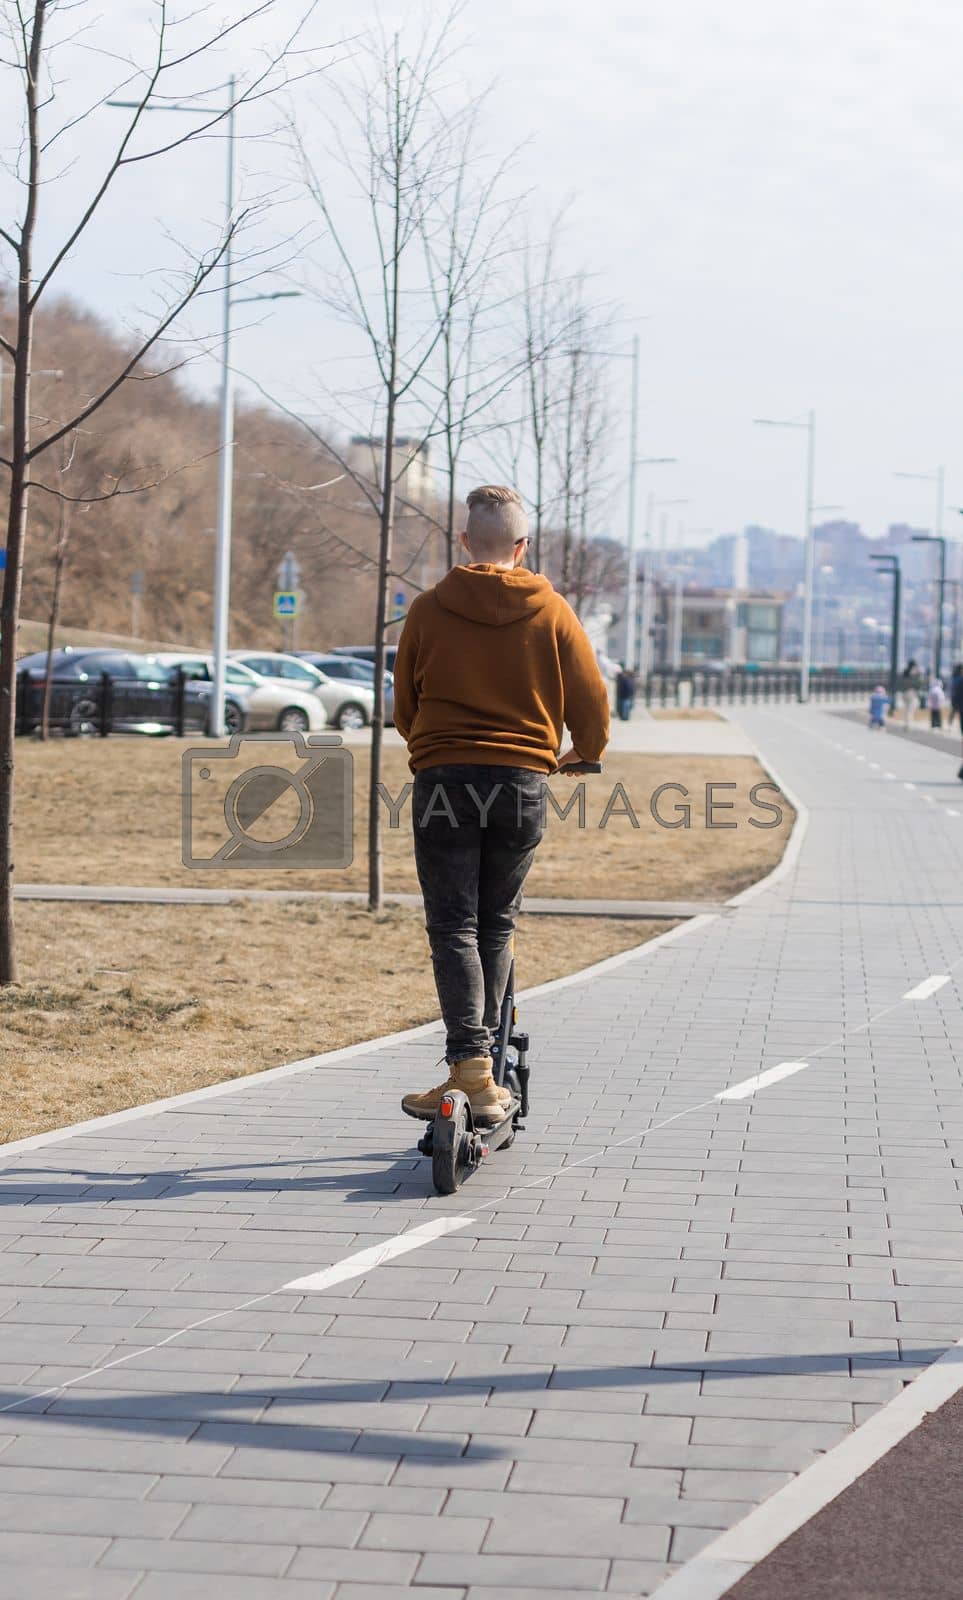 Royalty free image of Young man riding electric scooter in urban background. Modern transport and lifestyle concept. by Satura86